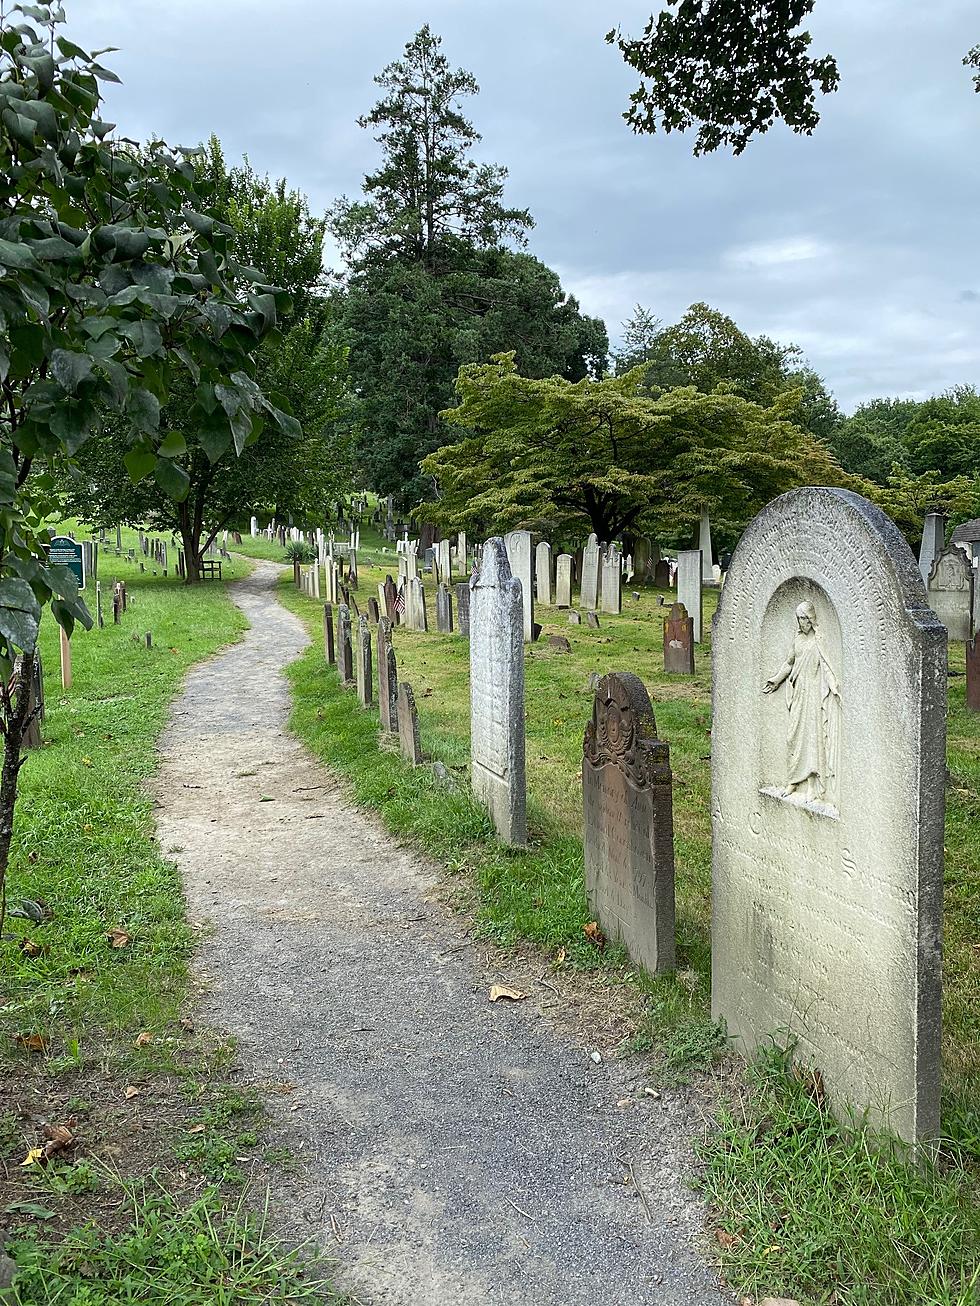 Would you Visit the Historic Sleepy Hollow Cemetery?